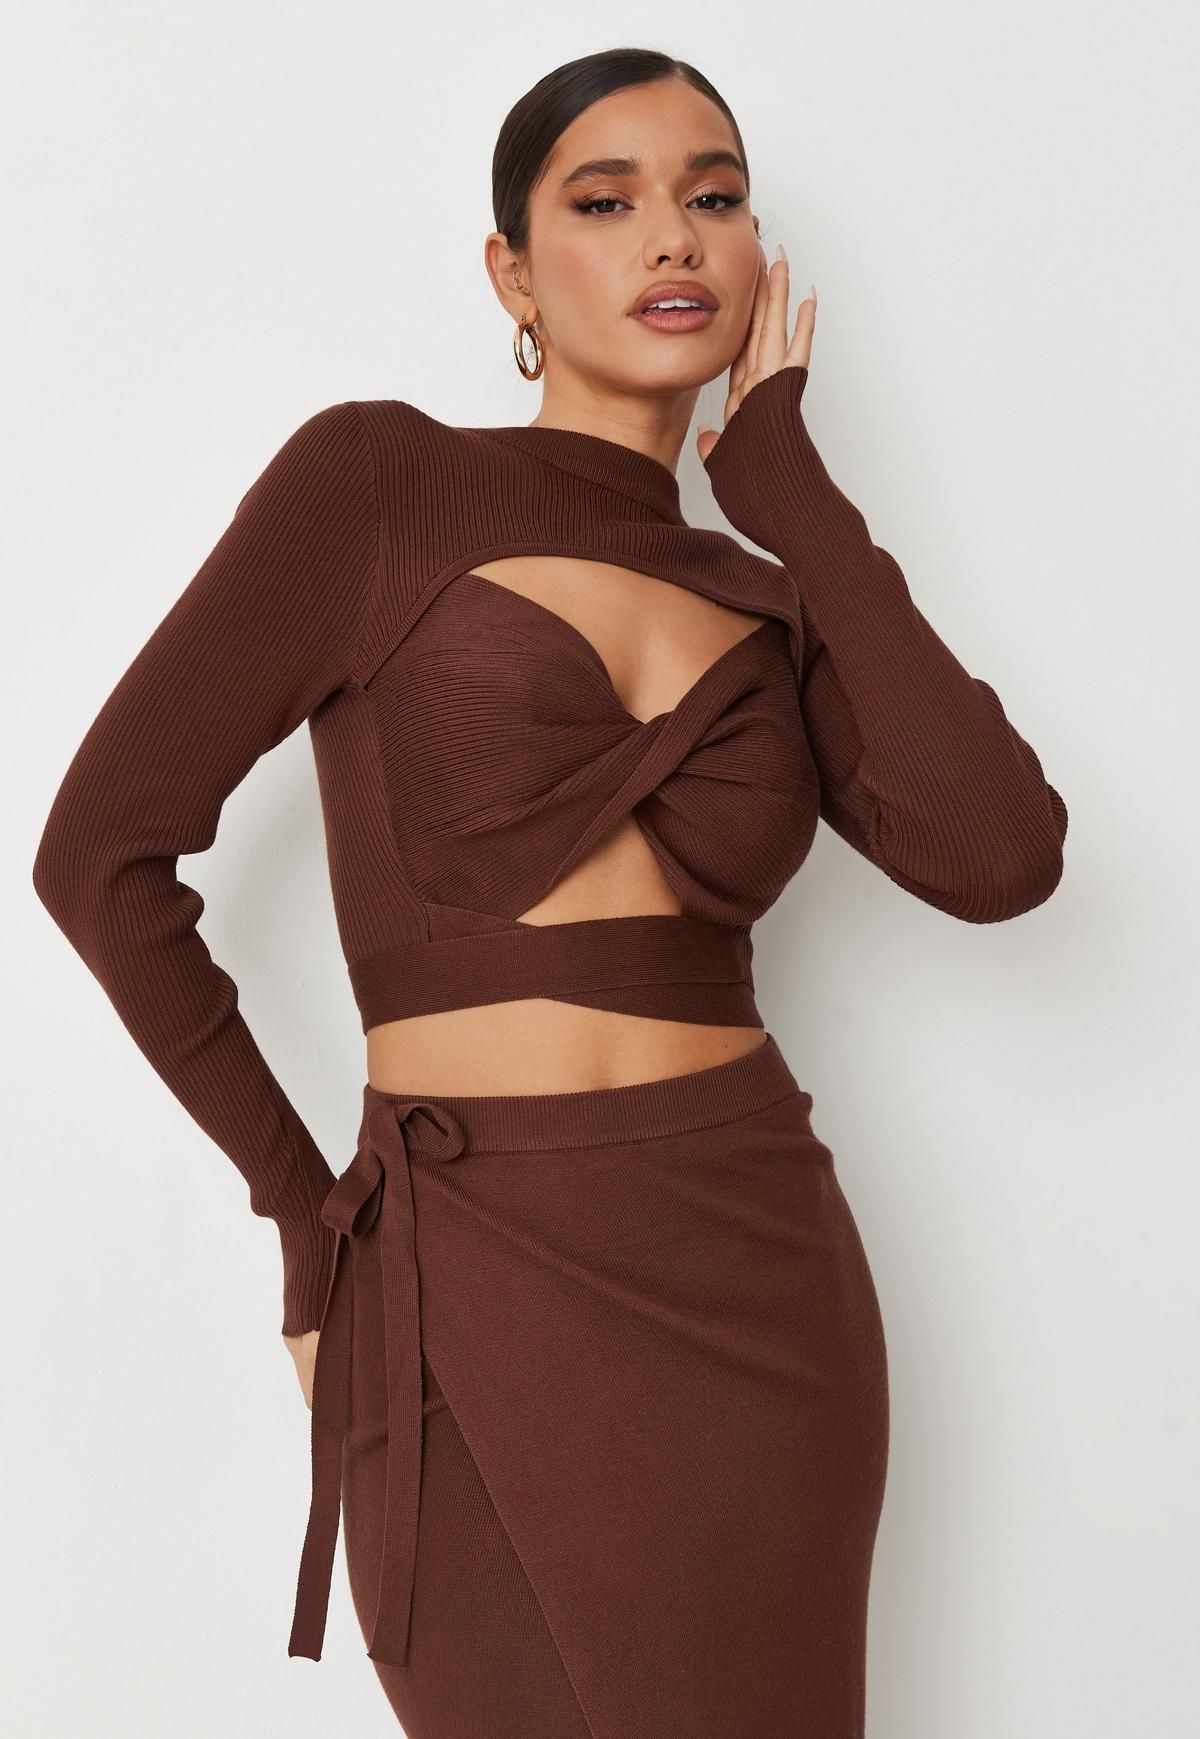 Missguided - Tall Chocolate Wrap Front Arm Warmer Knit Top | Missguided (UK & IE)